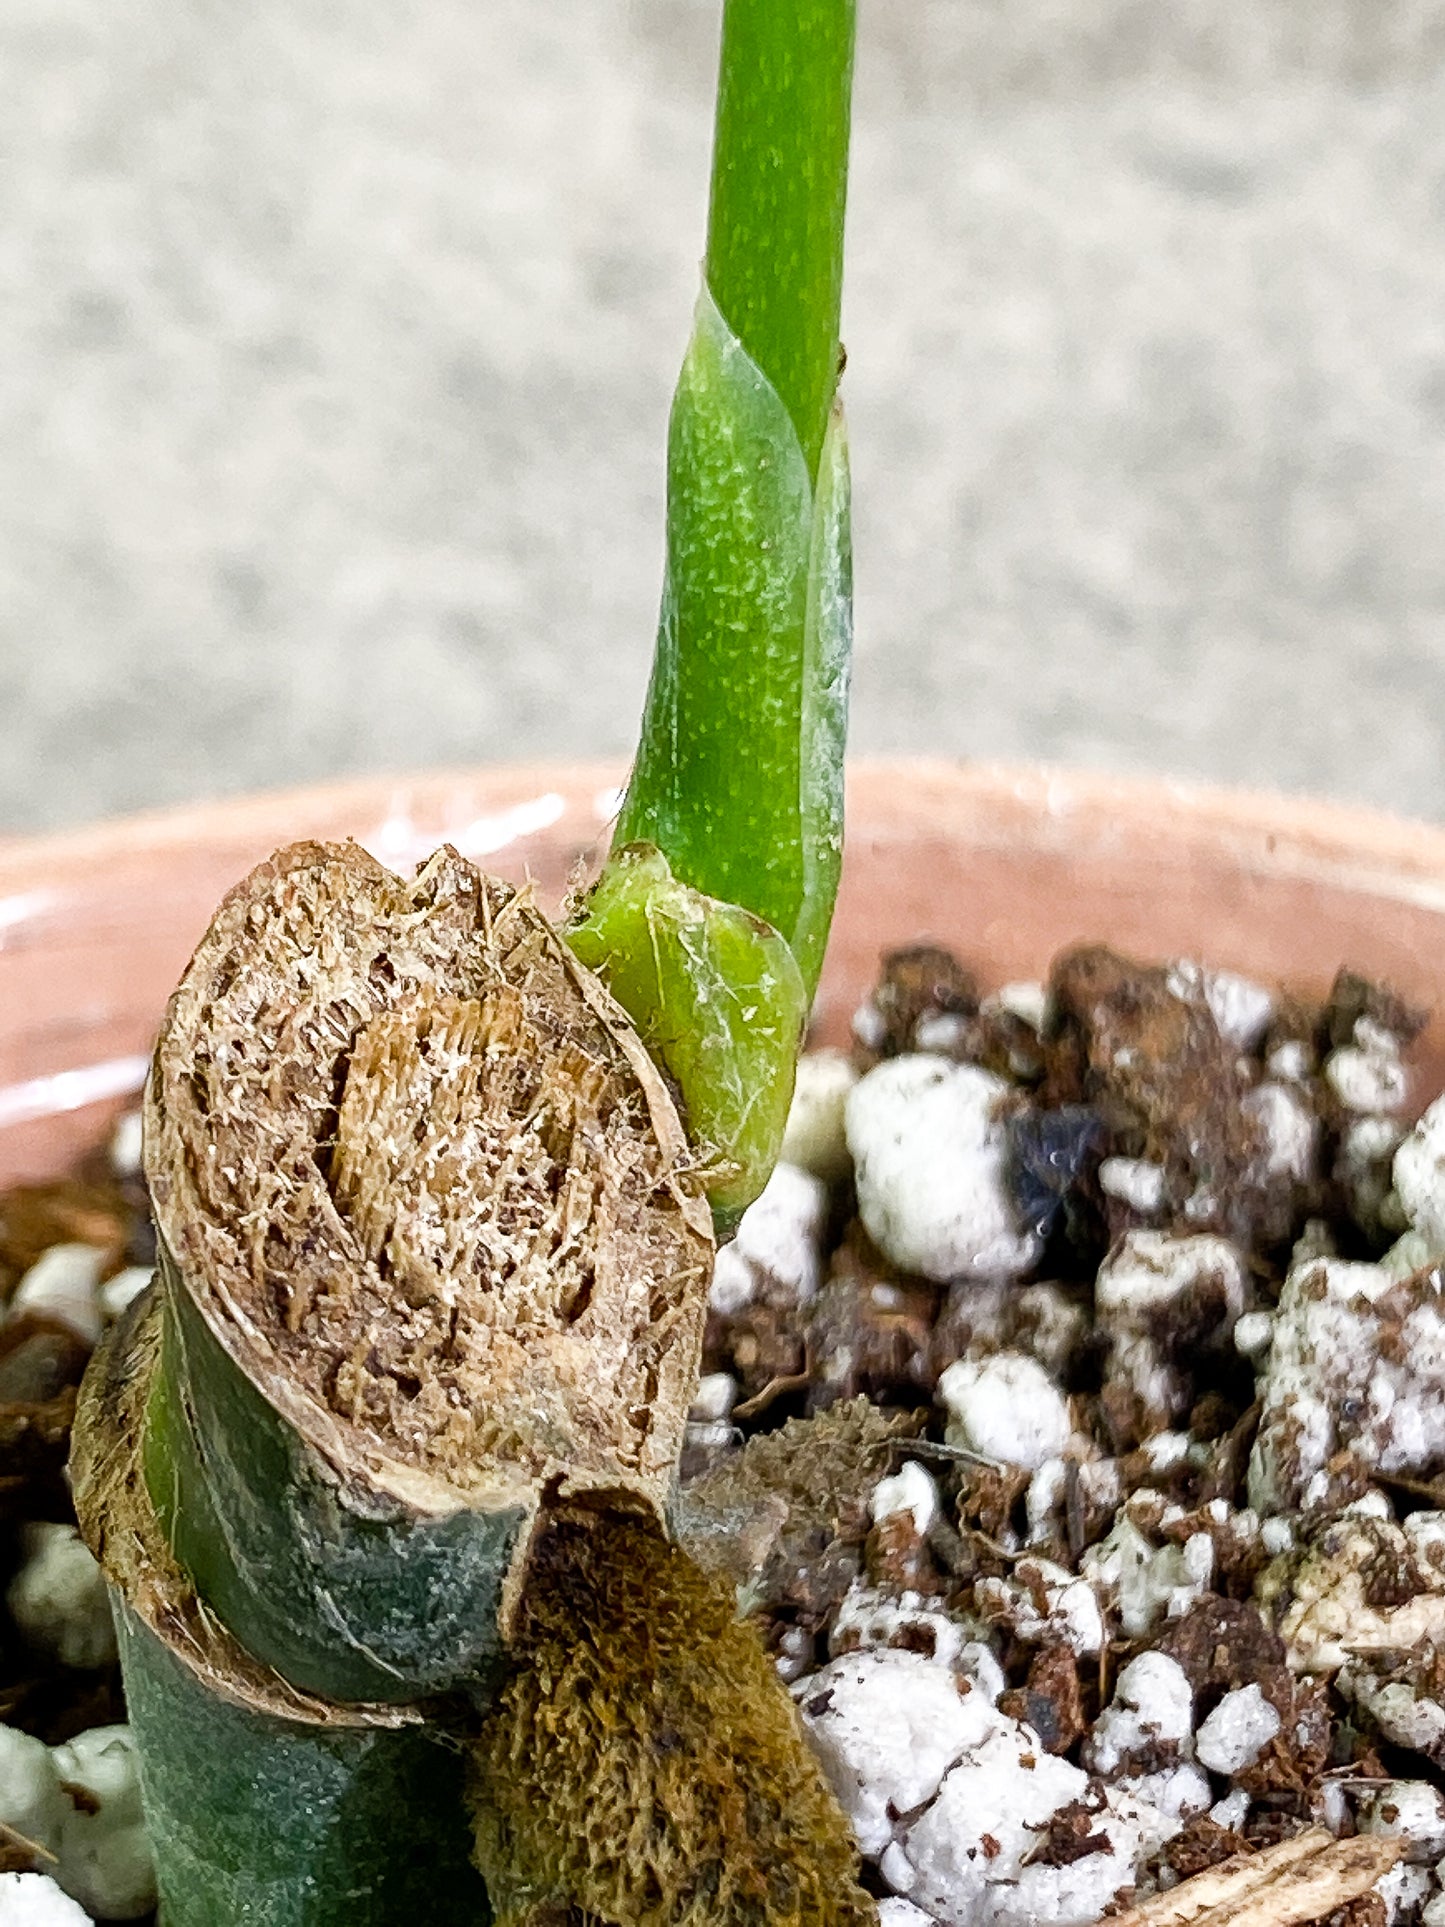 Monstera Esqueleto Sprout rooted